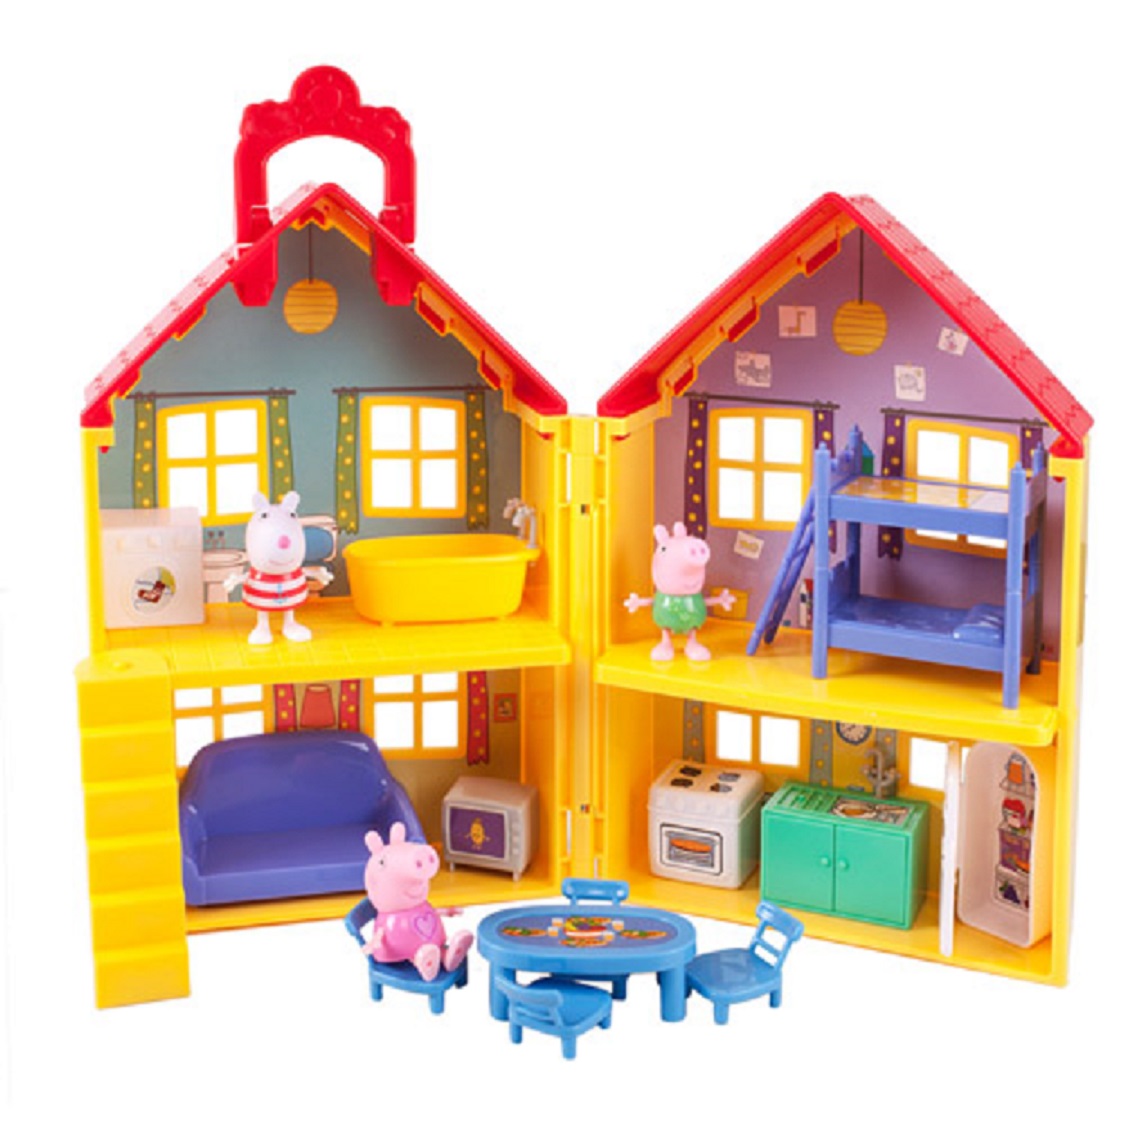 Peppa Pig Deluxe House Playset - image 1 of 6